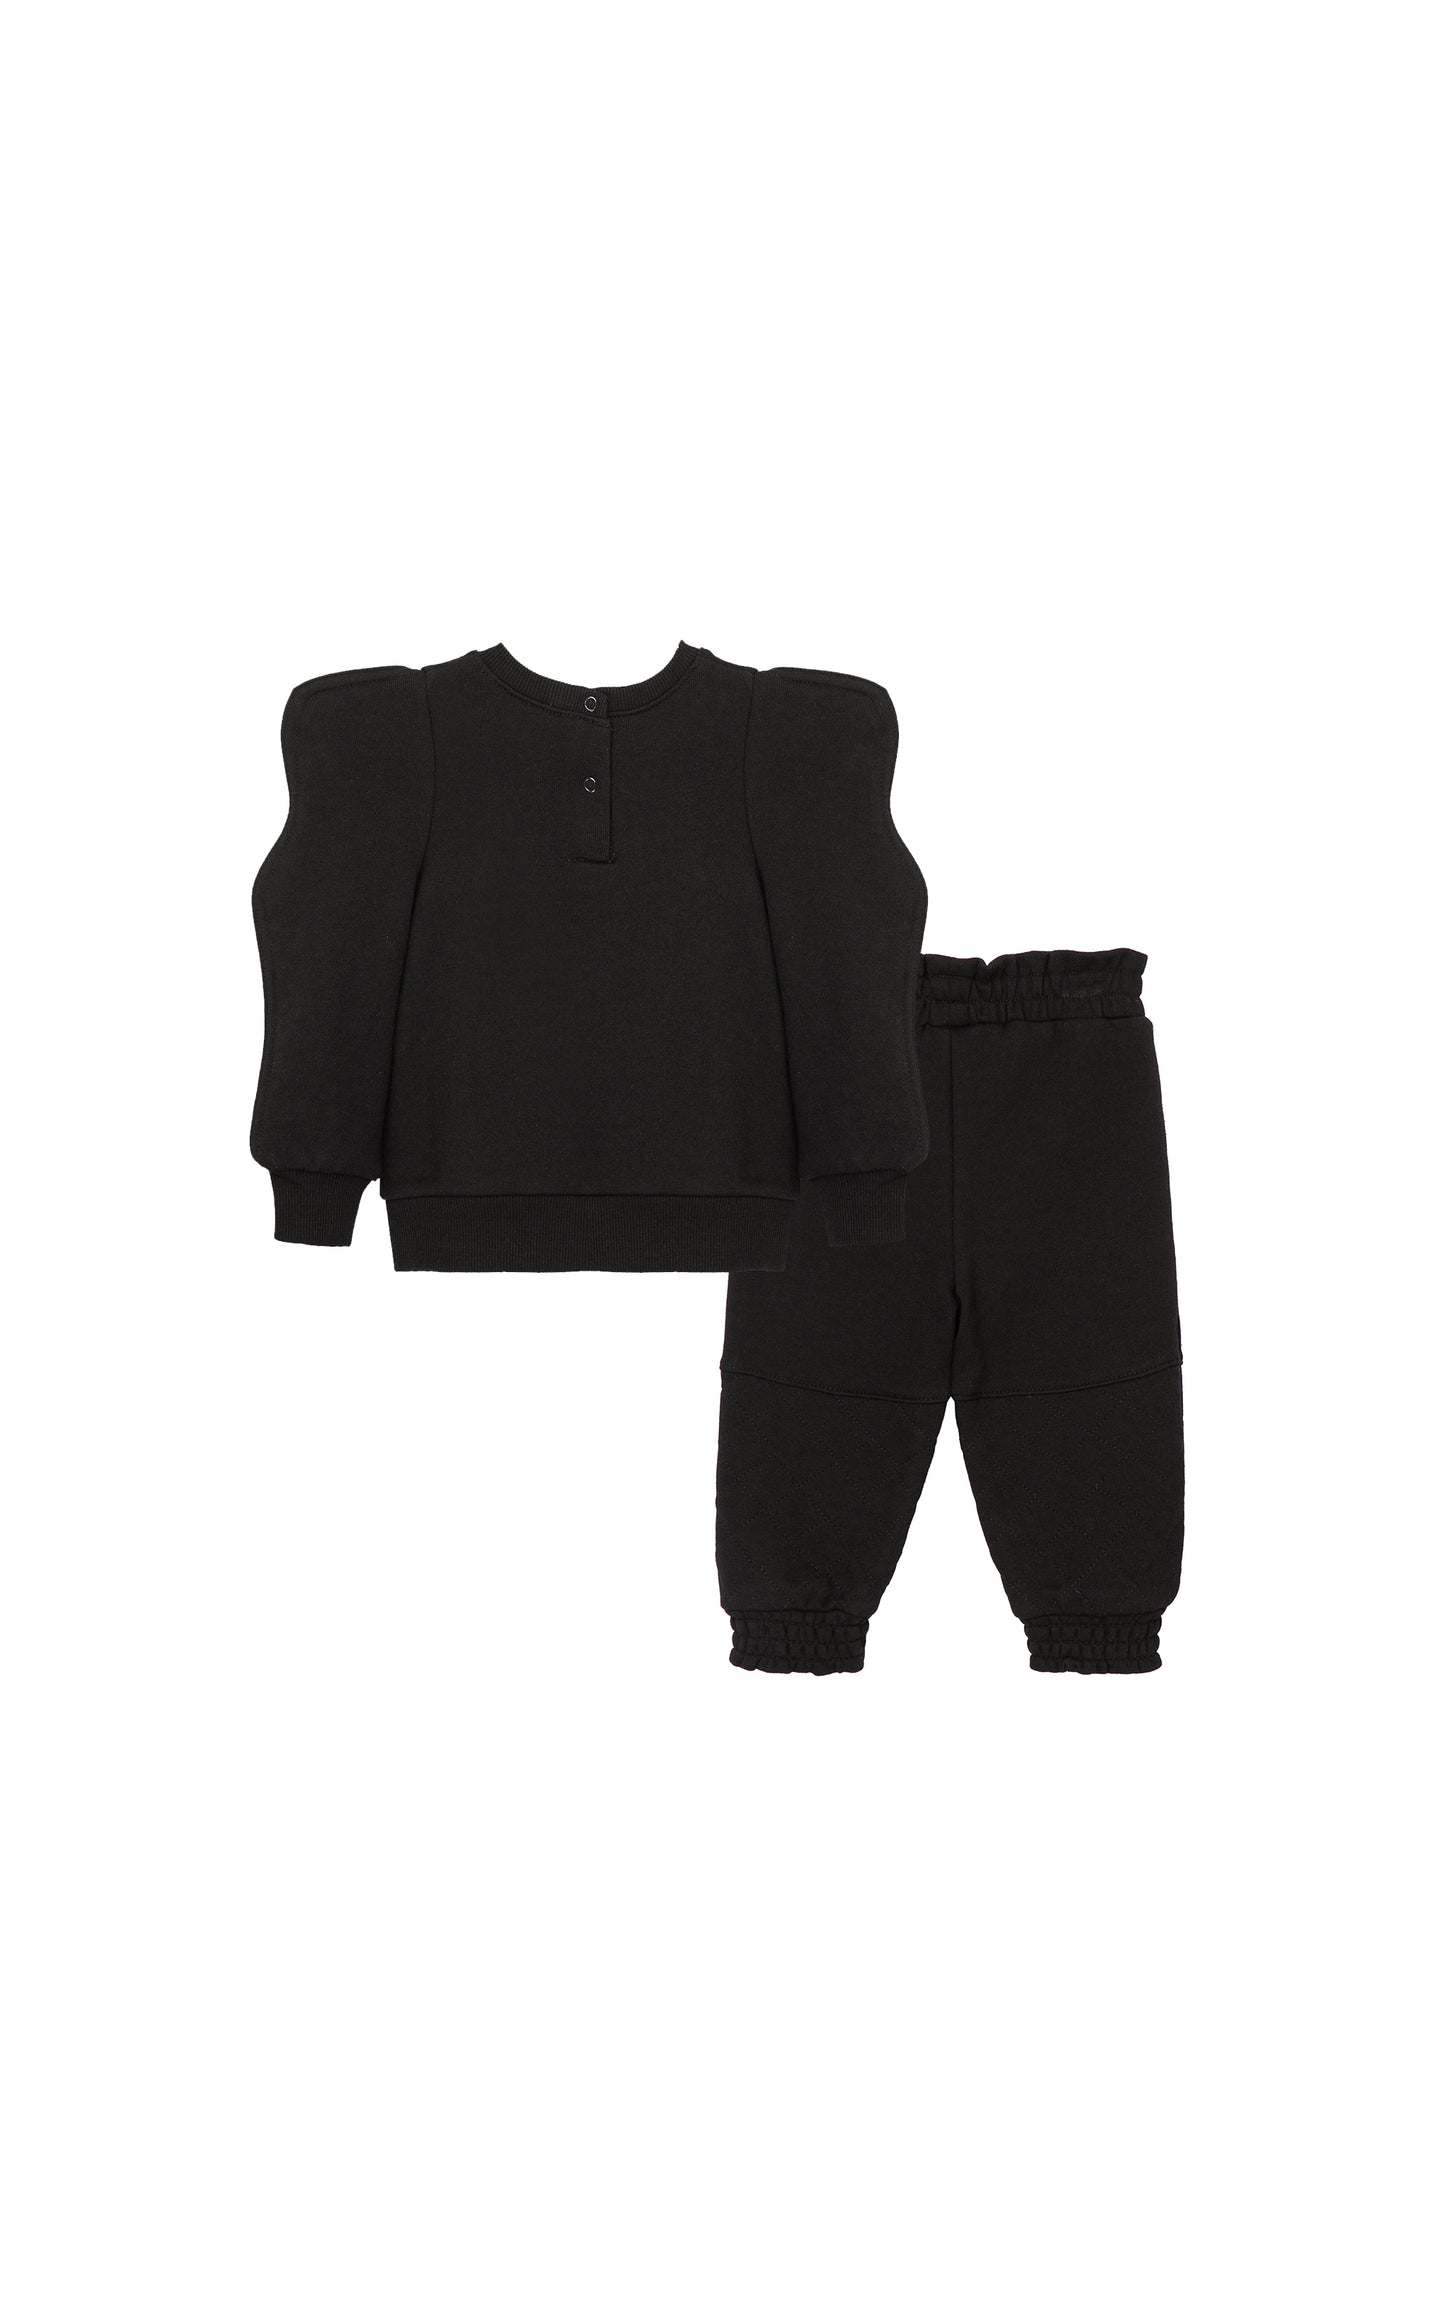 BACK OF BLACK FRENCH TERRY TOP WITH WAVY SLEEVES AND QUILTED KANGAROO POCKET. PAIRED WITH A MATCHING PULL-ON JOGGER.